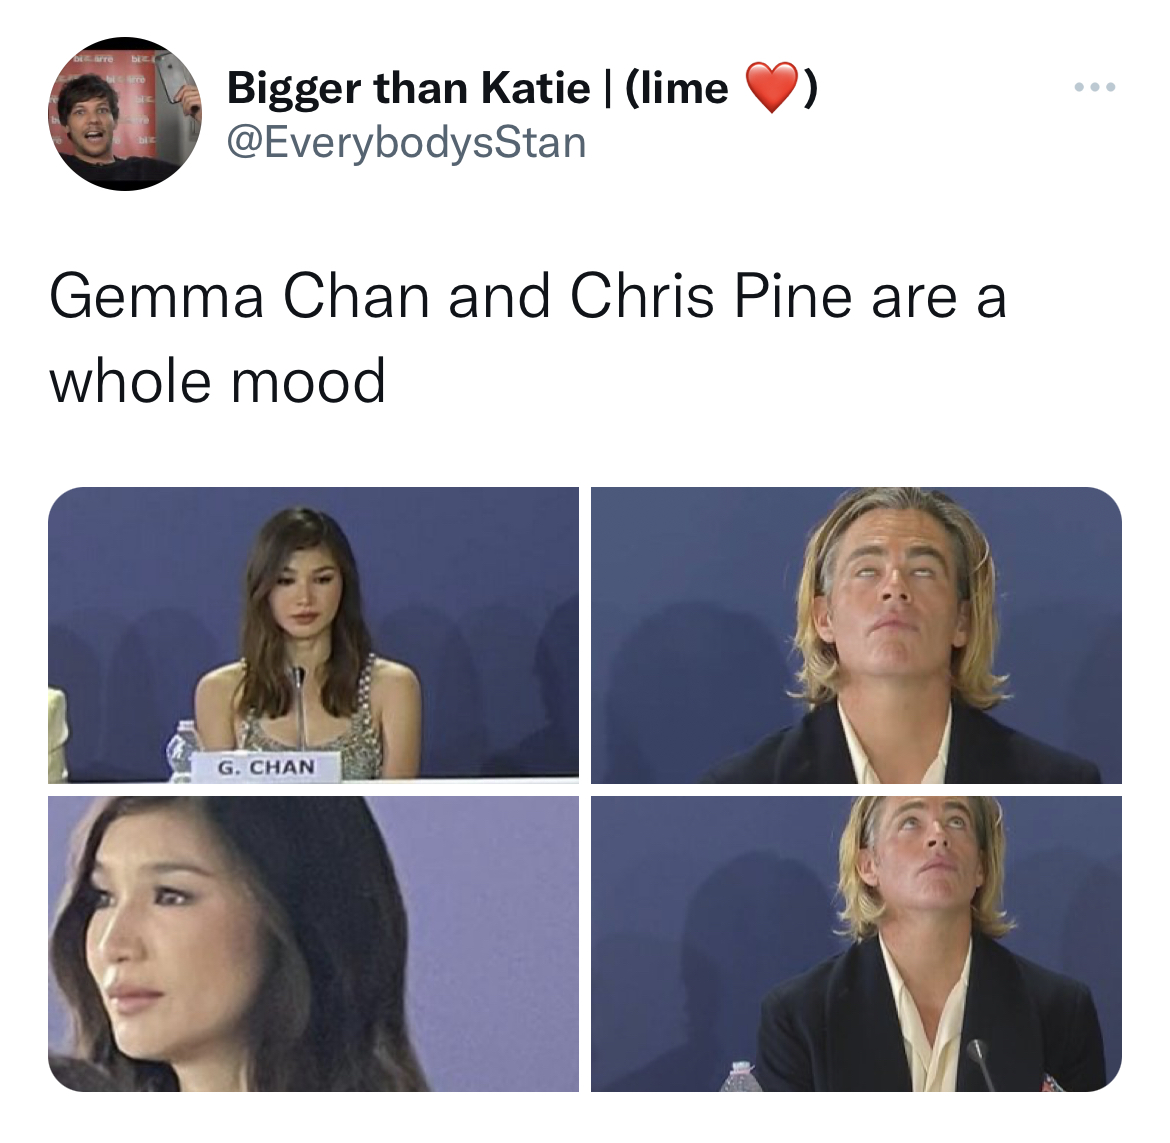 Chris Pine Venice Film Festival Memes - facial expression - Bigger than Katie | lime Gemma Chan and Chris Pine are a whole mood G. Chan